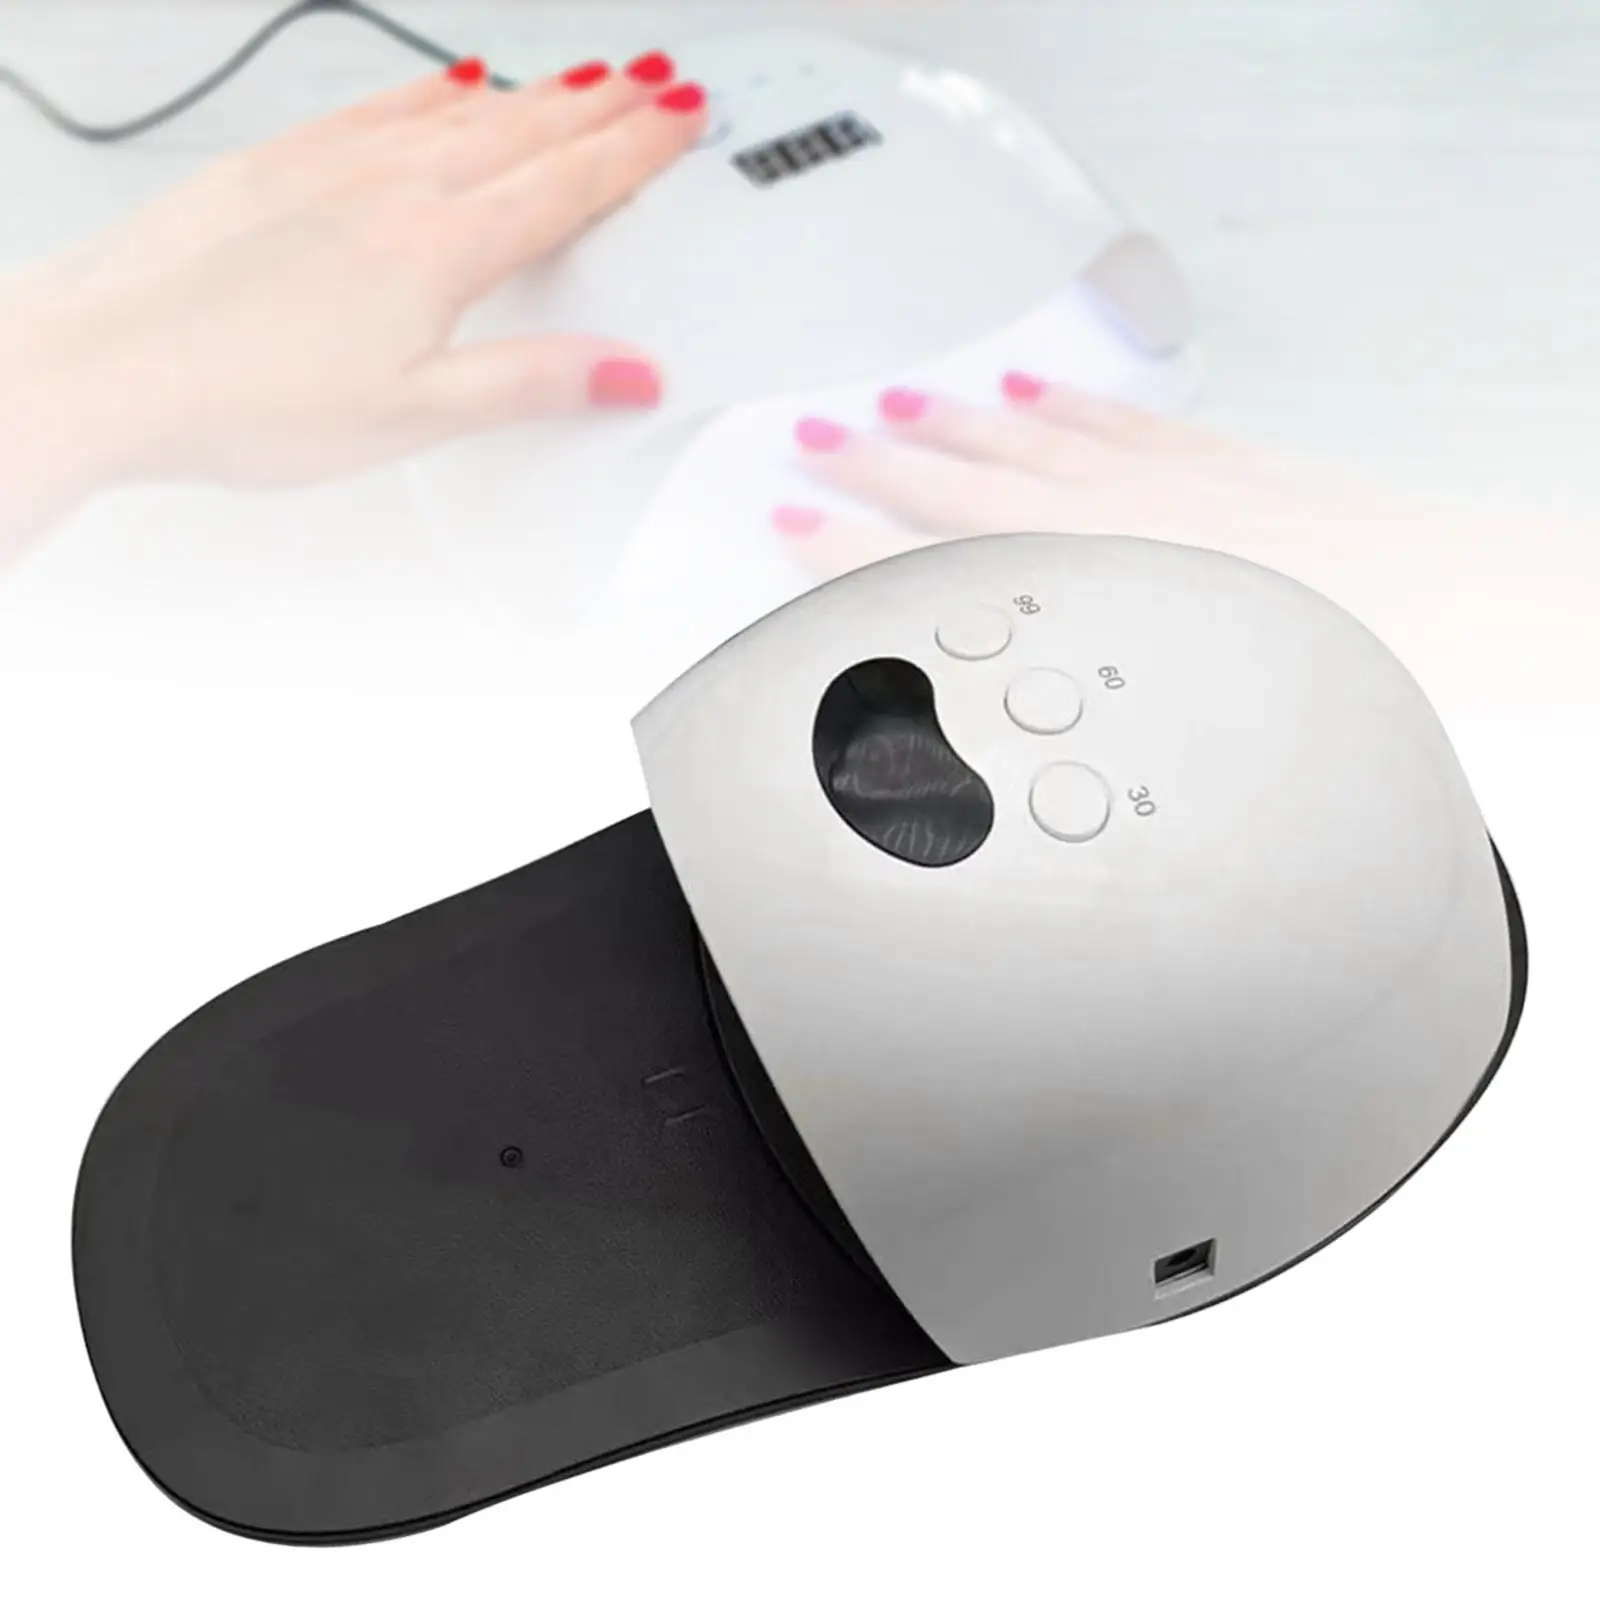 LED Nail Lamp Quick Drying Manicure Pedicure Tool for Fingernail and Toenail Digital Display 48W for Nail Gel Polish Curing